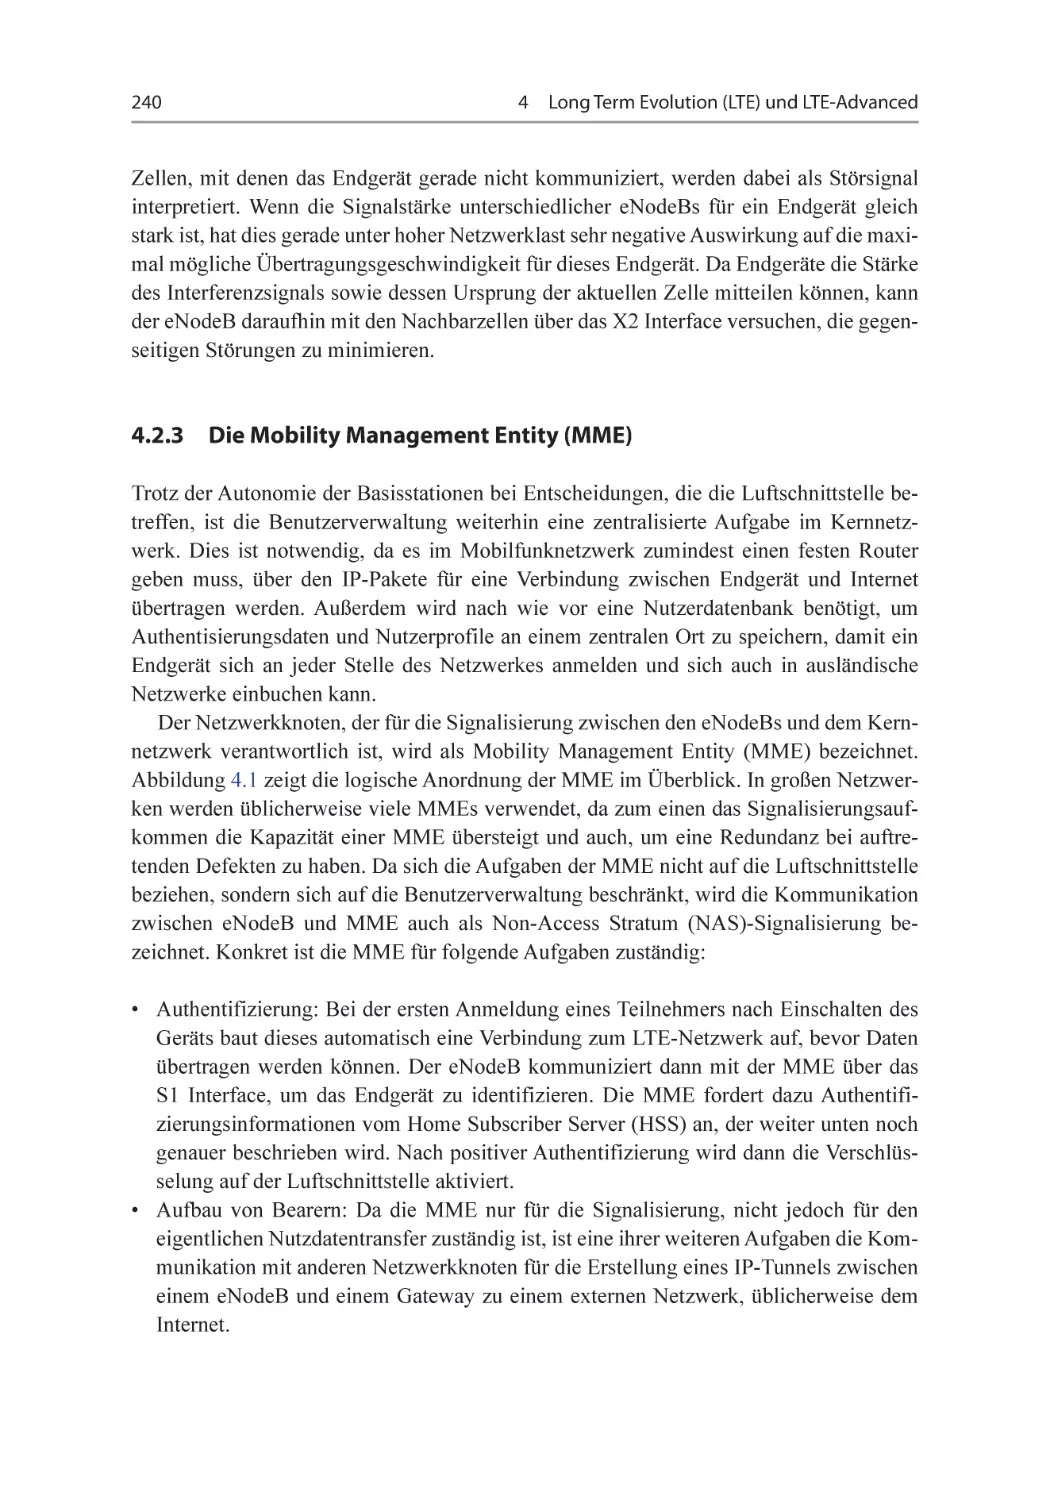 4.2.3 Die Mobility Management Entity (MME)